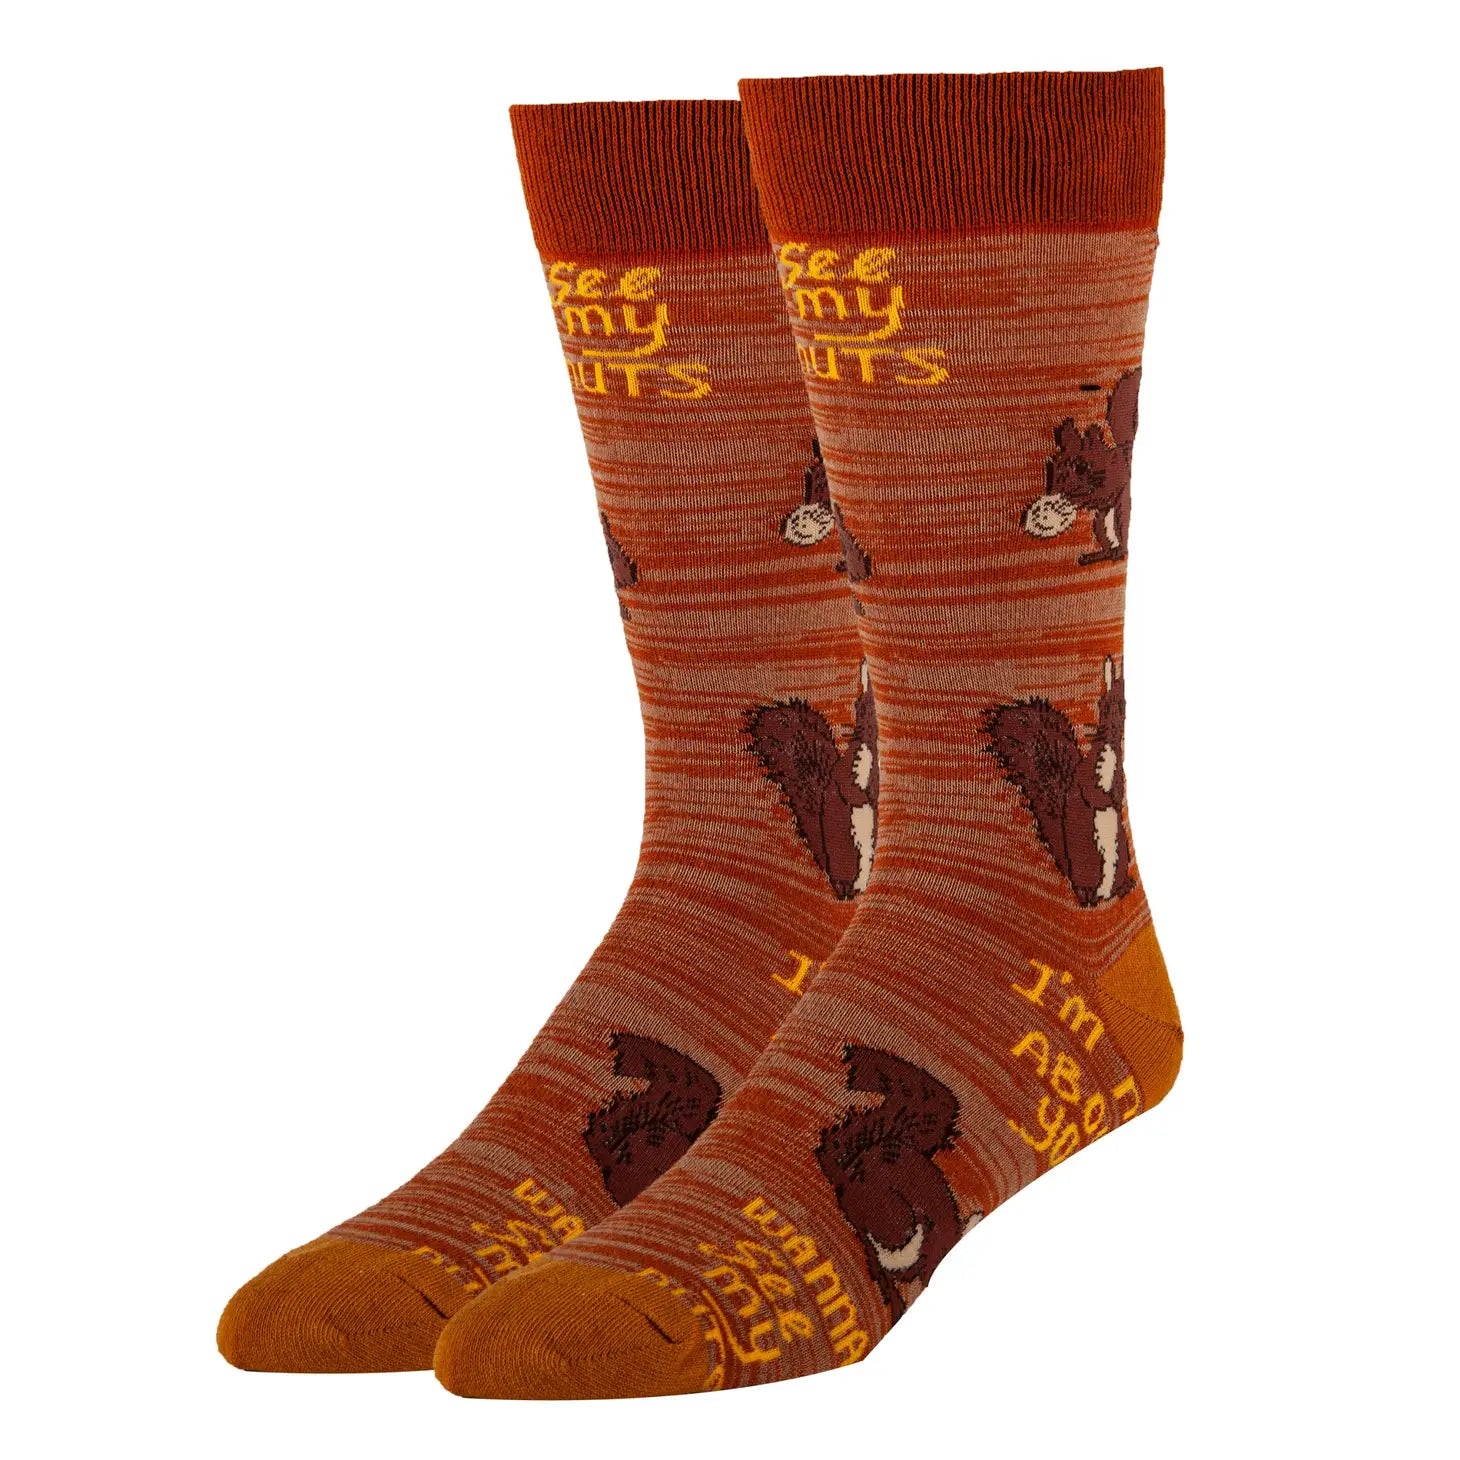 JY Designs & Creation - Socks Nuts About You